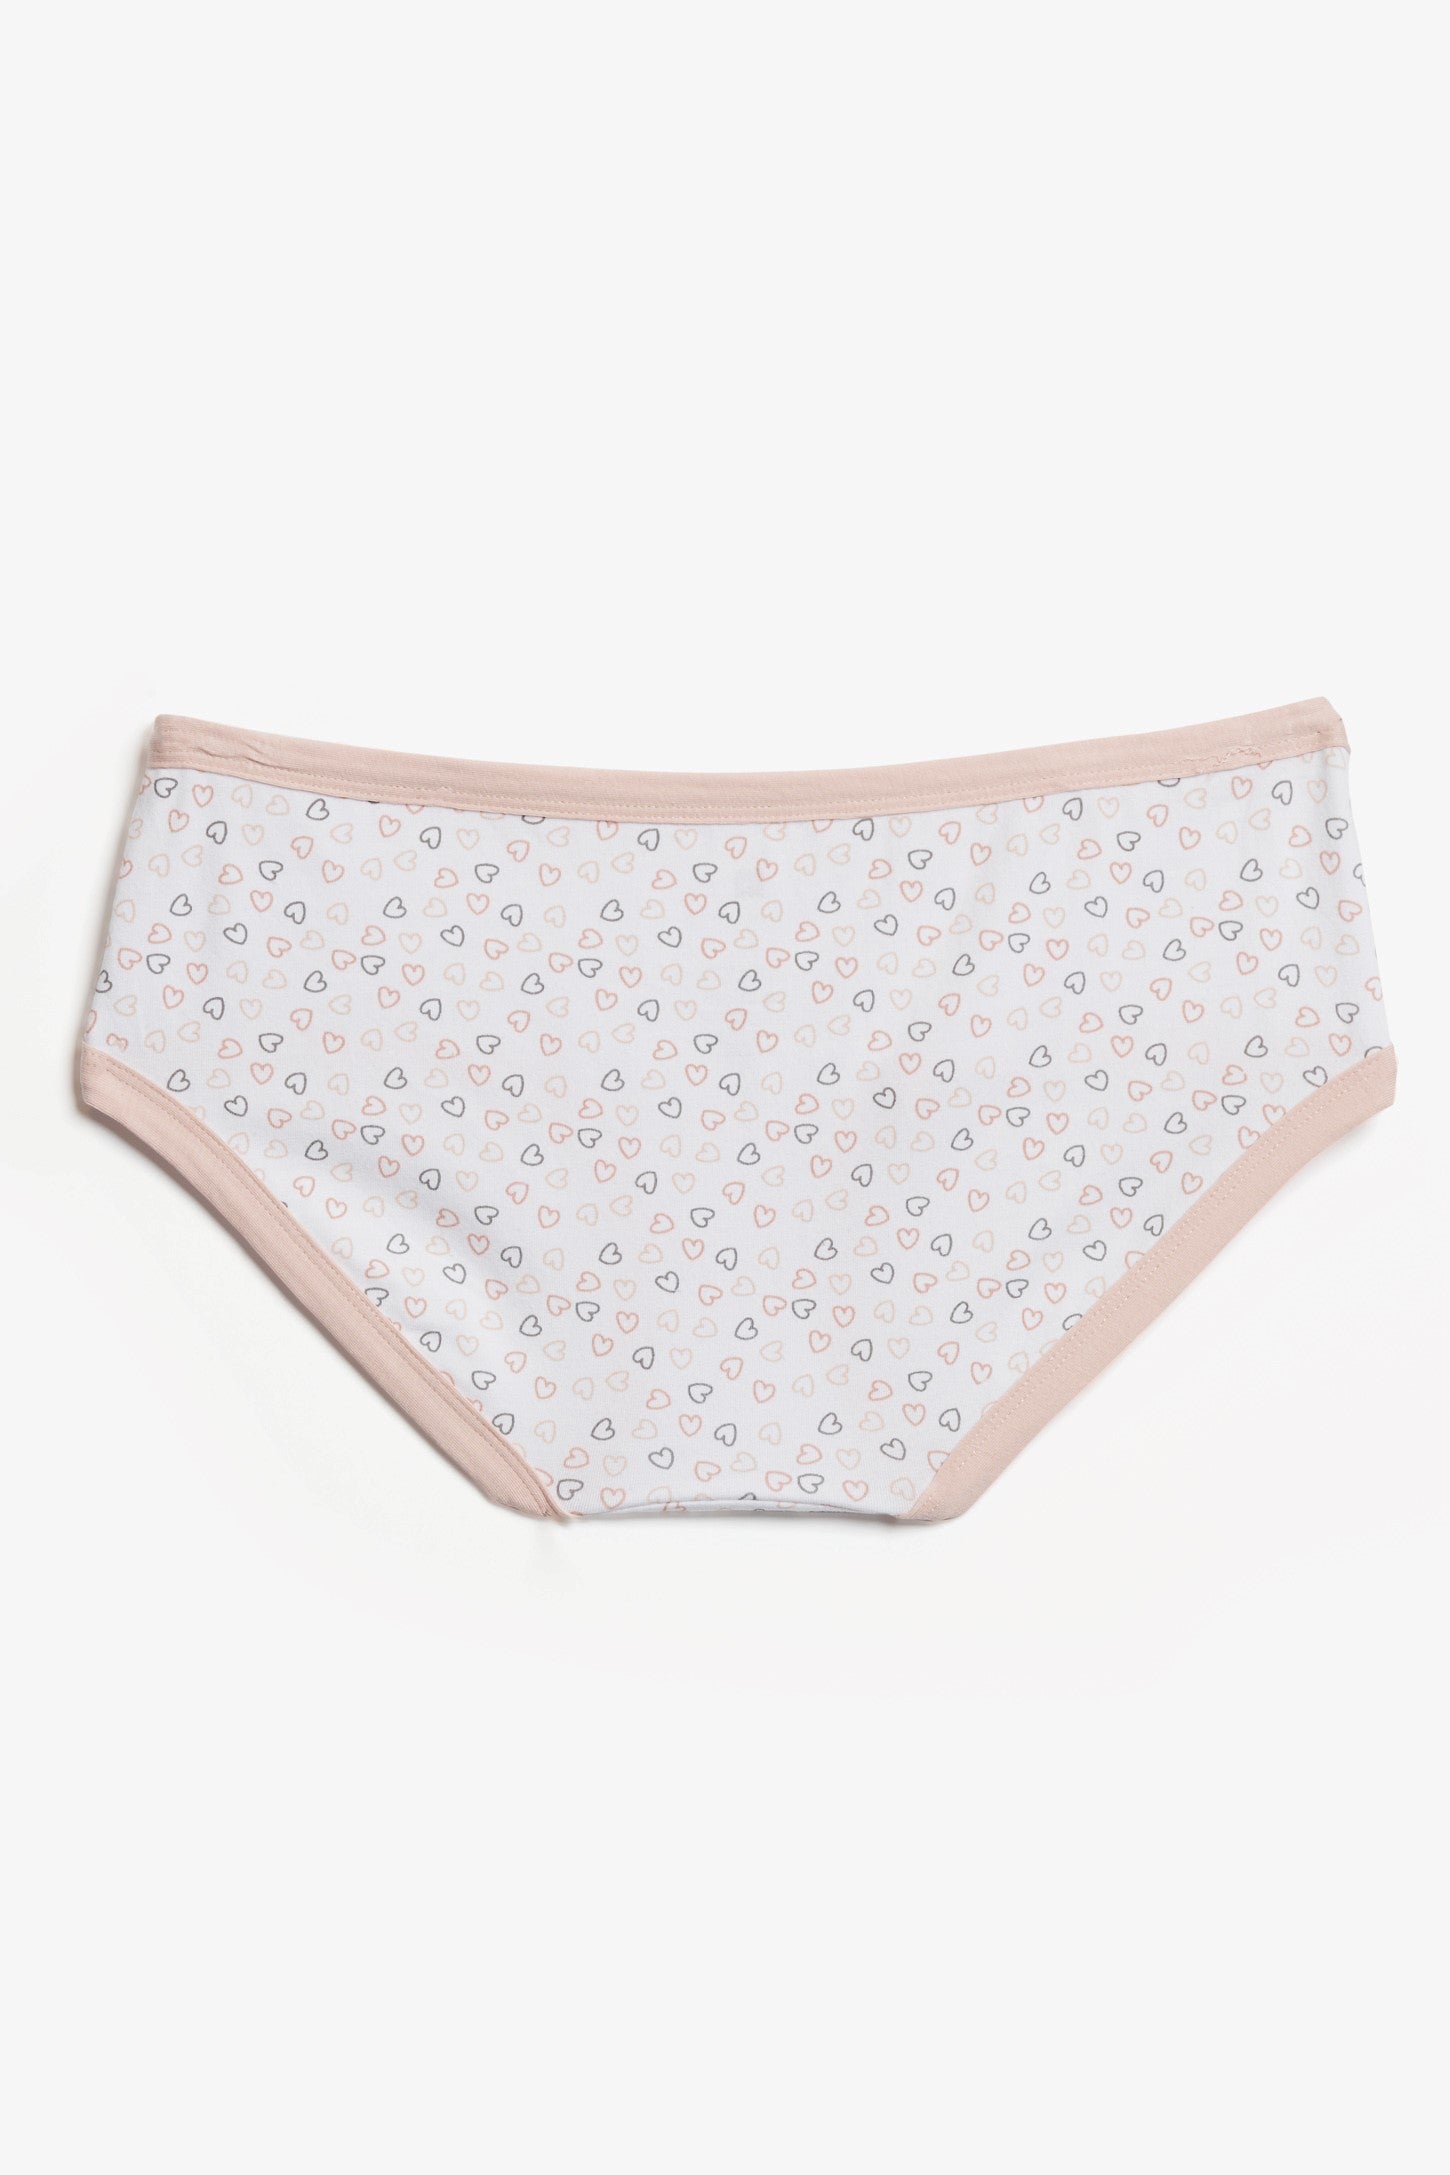 Culotte Hipster, 3/15$ - Ado fille && BLANC